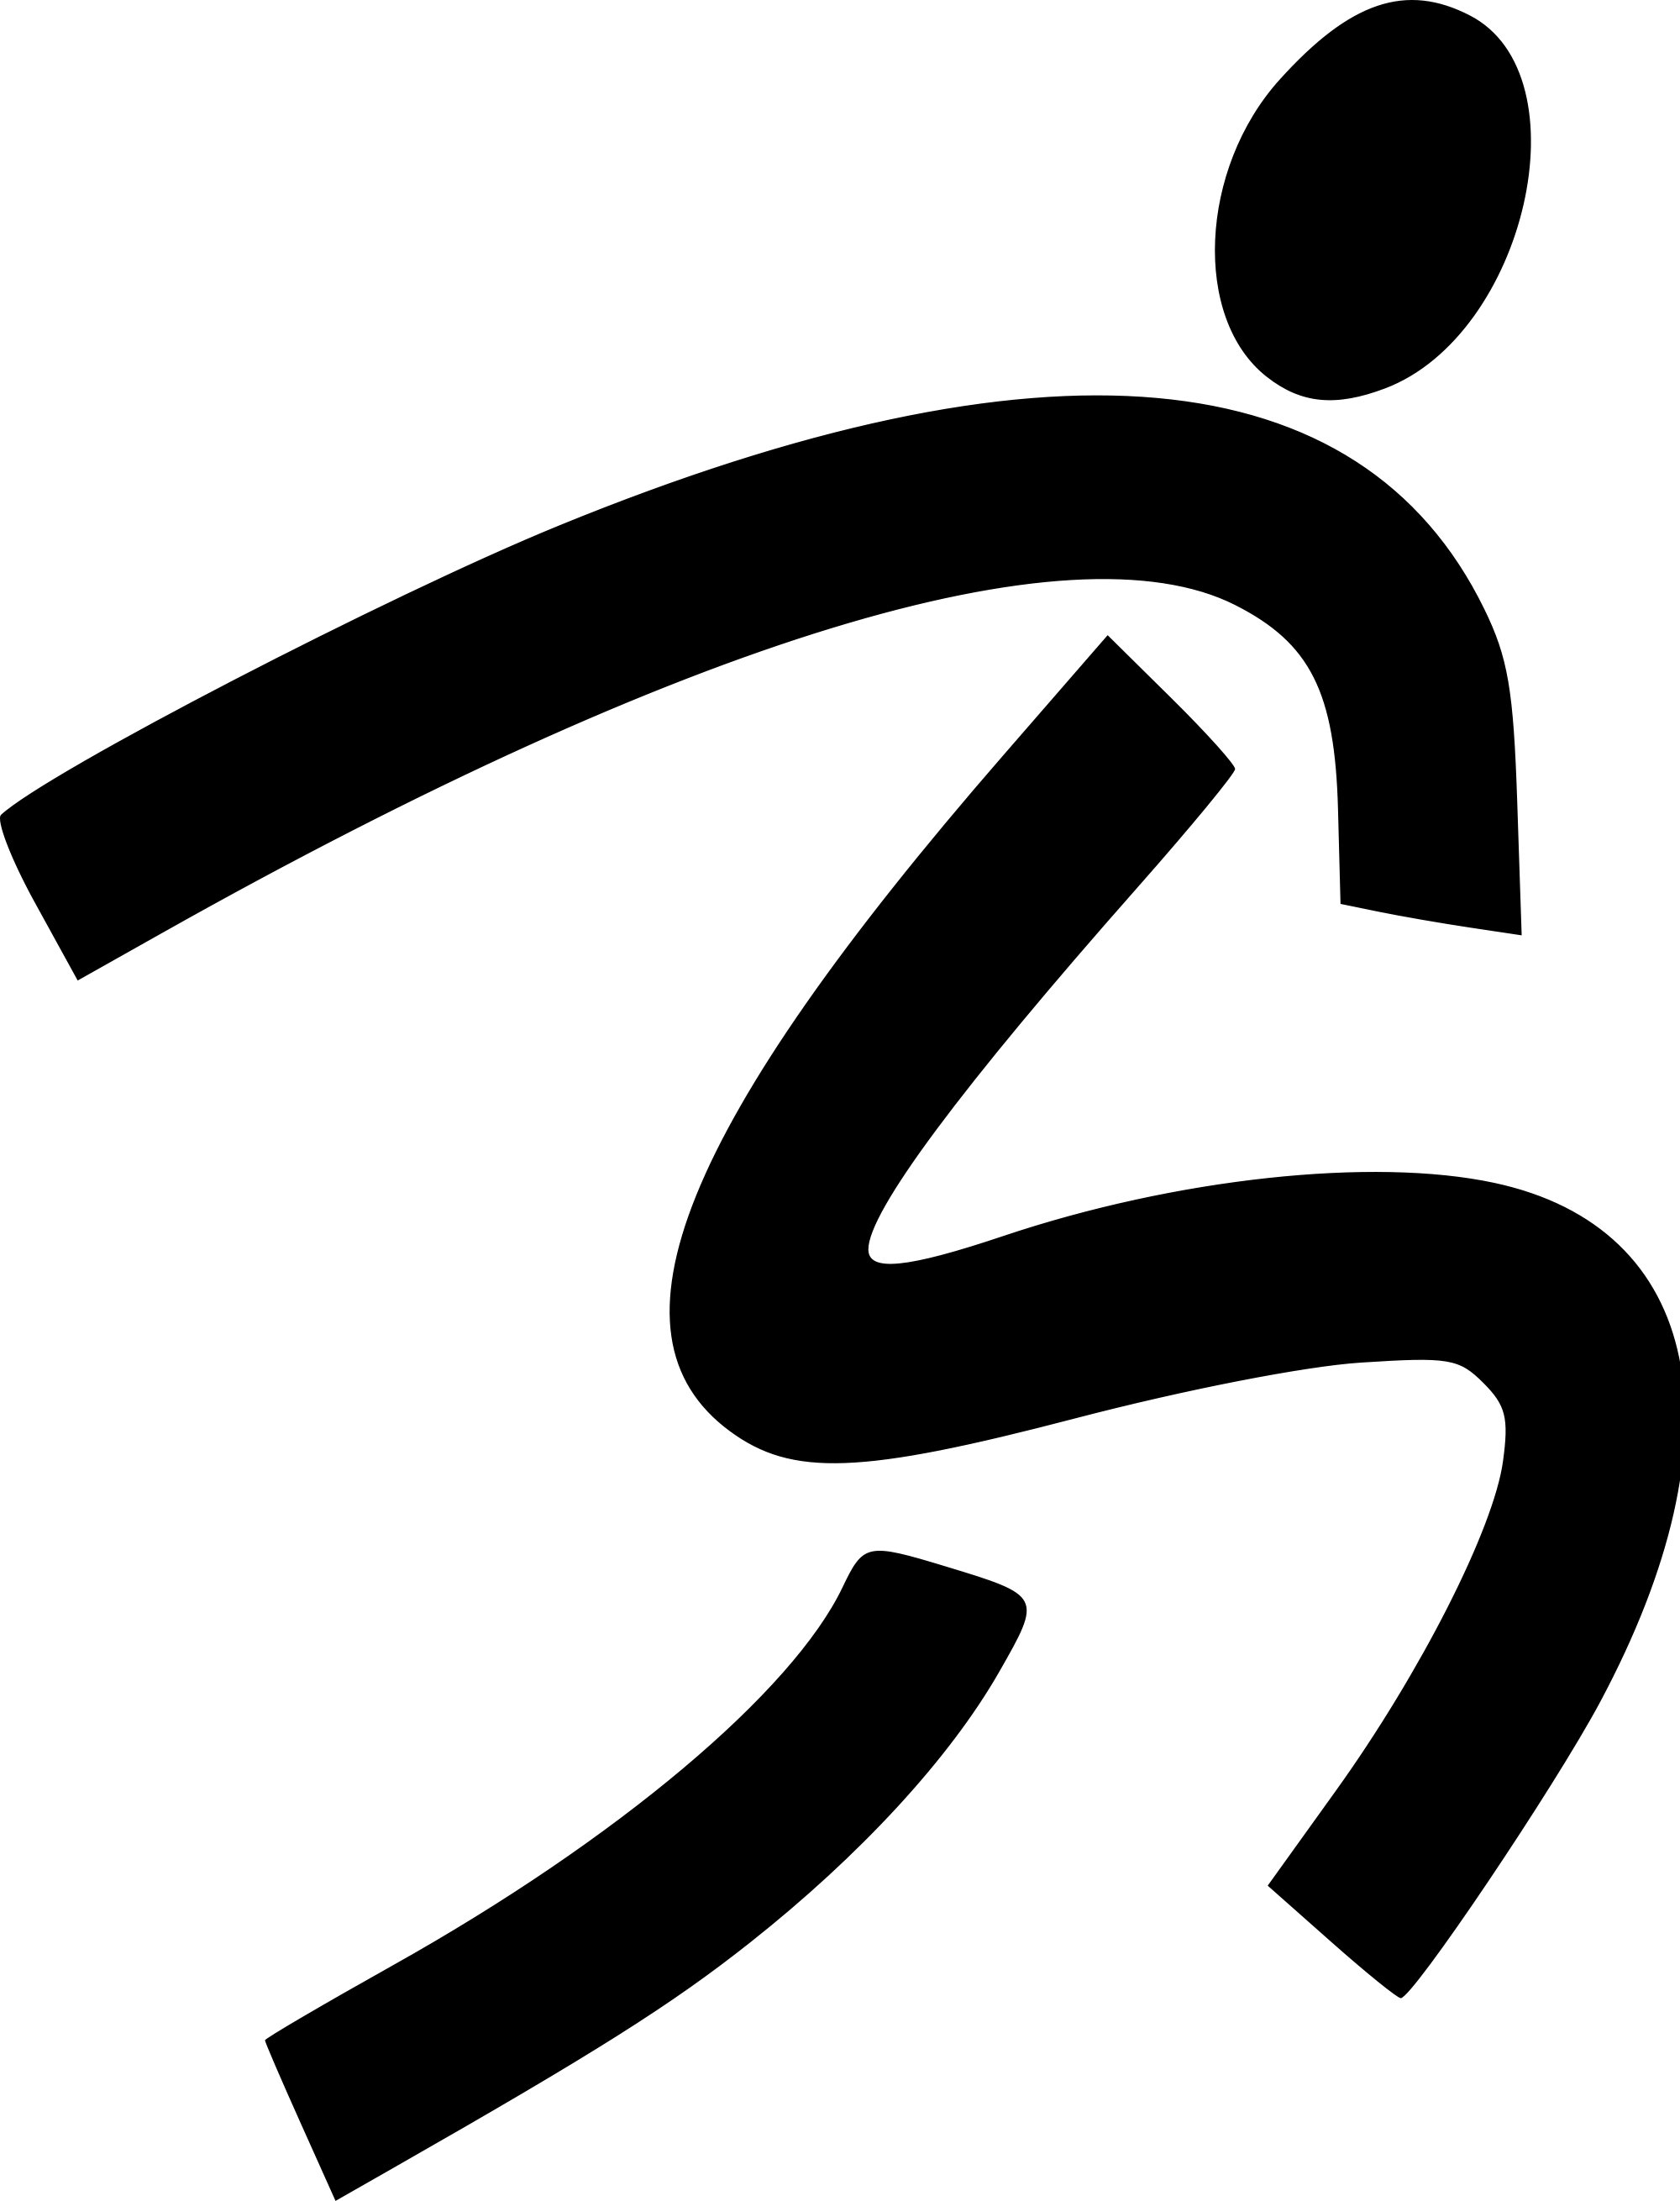 Free Cross Country Running Symbol, Download Free Clip Art.